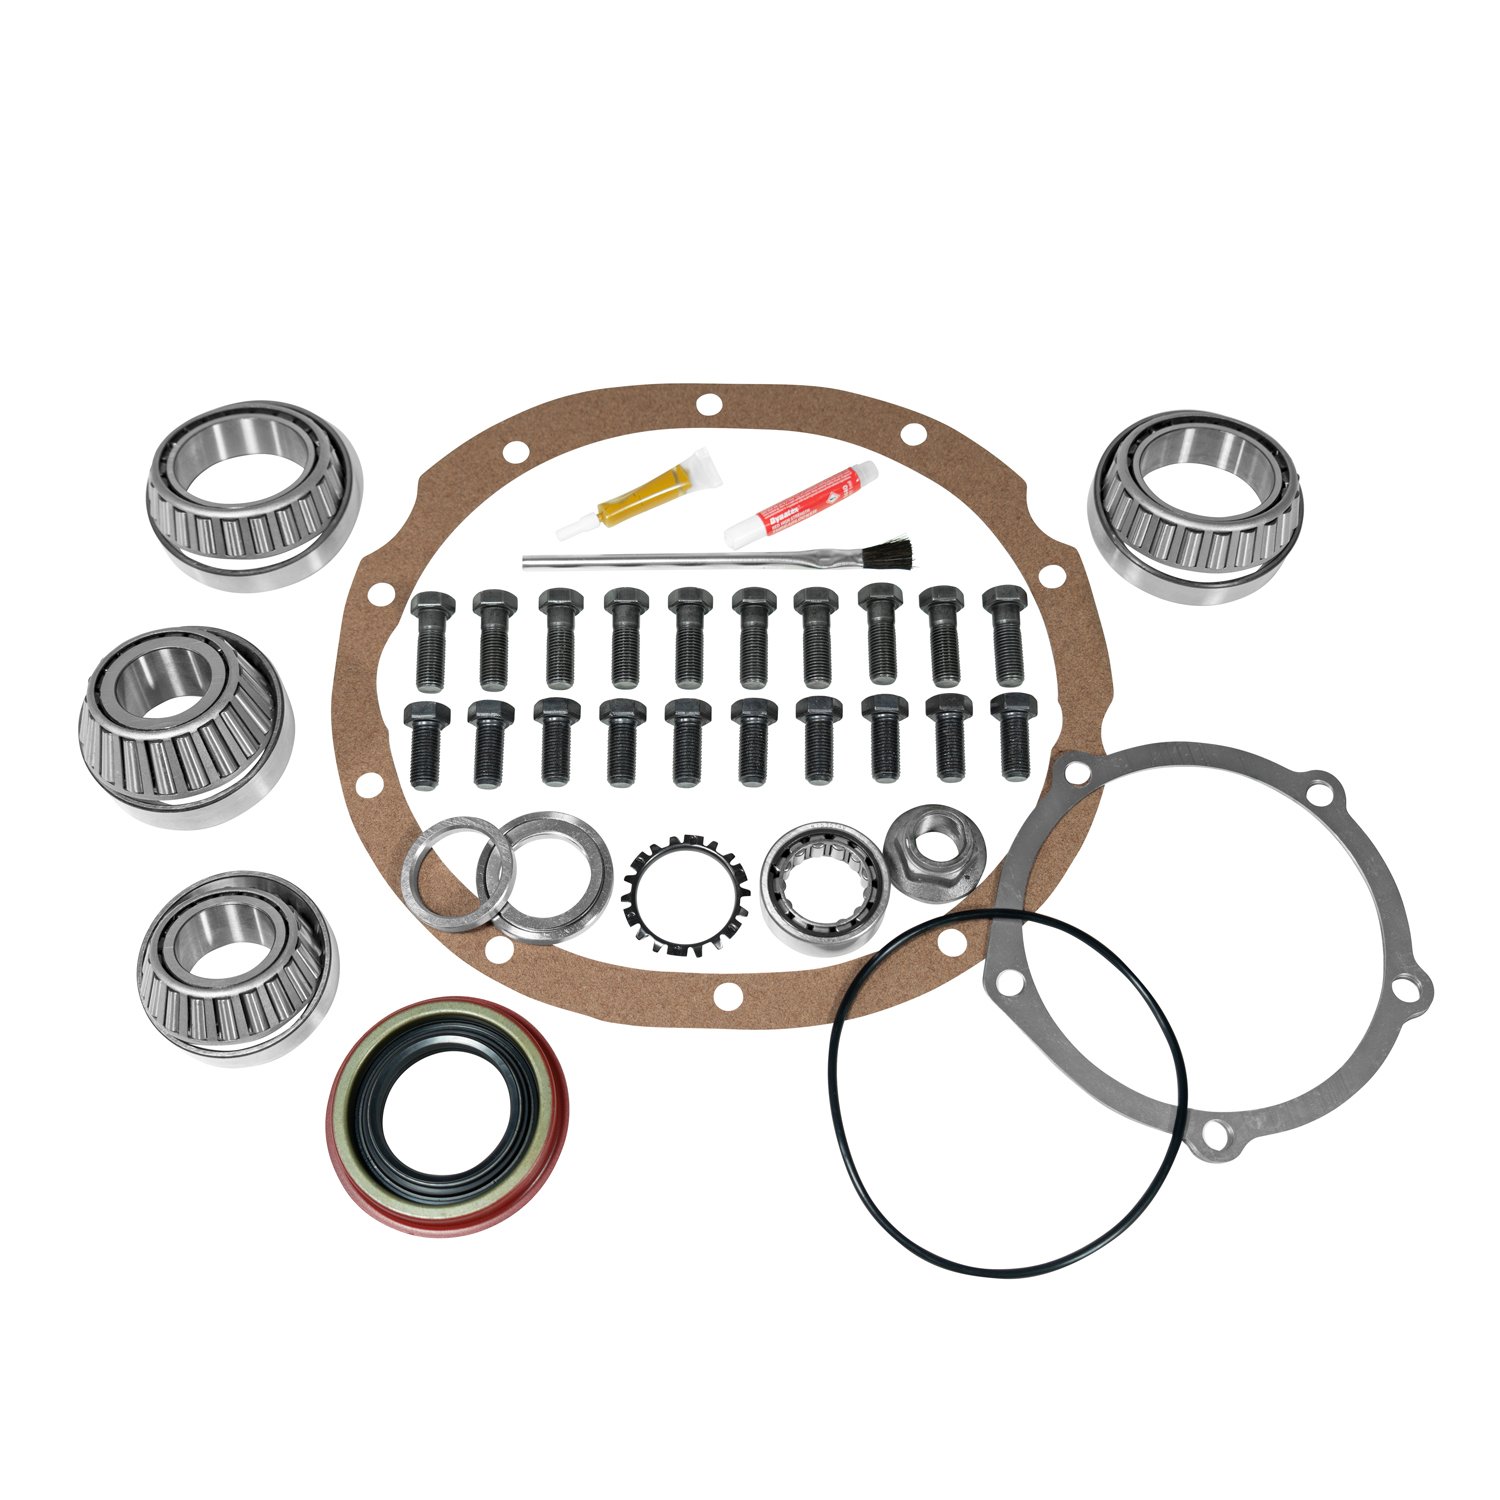 Master Overhaul Kit For Ford 9 in. Lm603011 Diff W/Crush Sleeve Eliminator